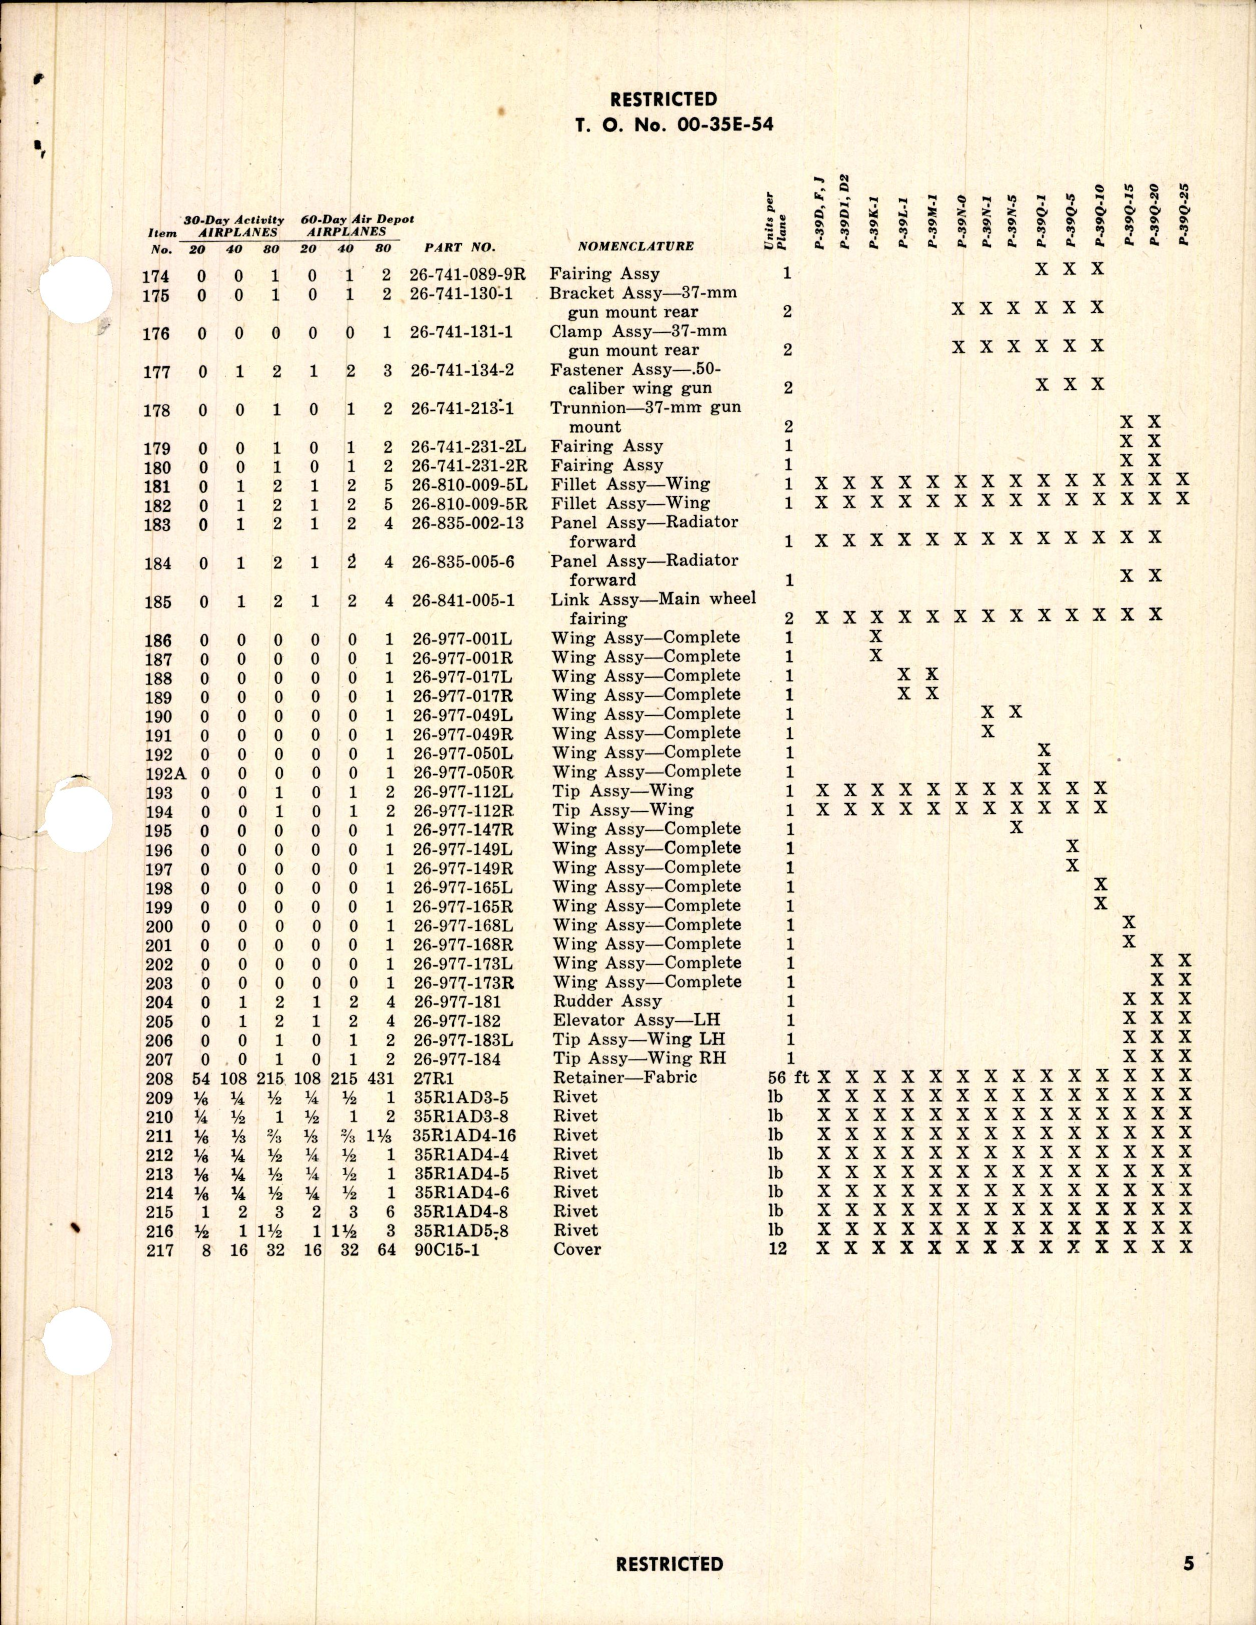 Sample page 7 from AirCorps Library document: Table of Credit Aircraft Maintenance Parts for P-39